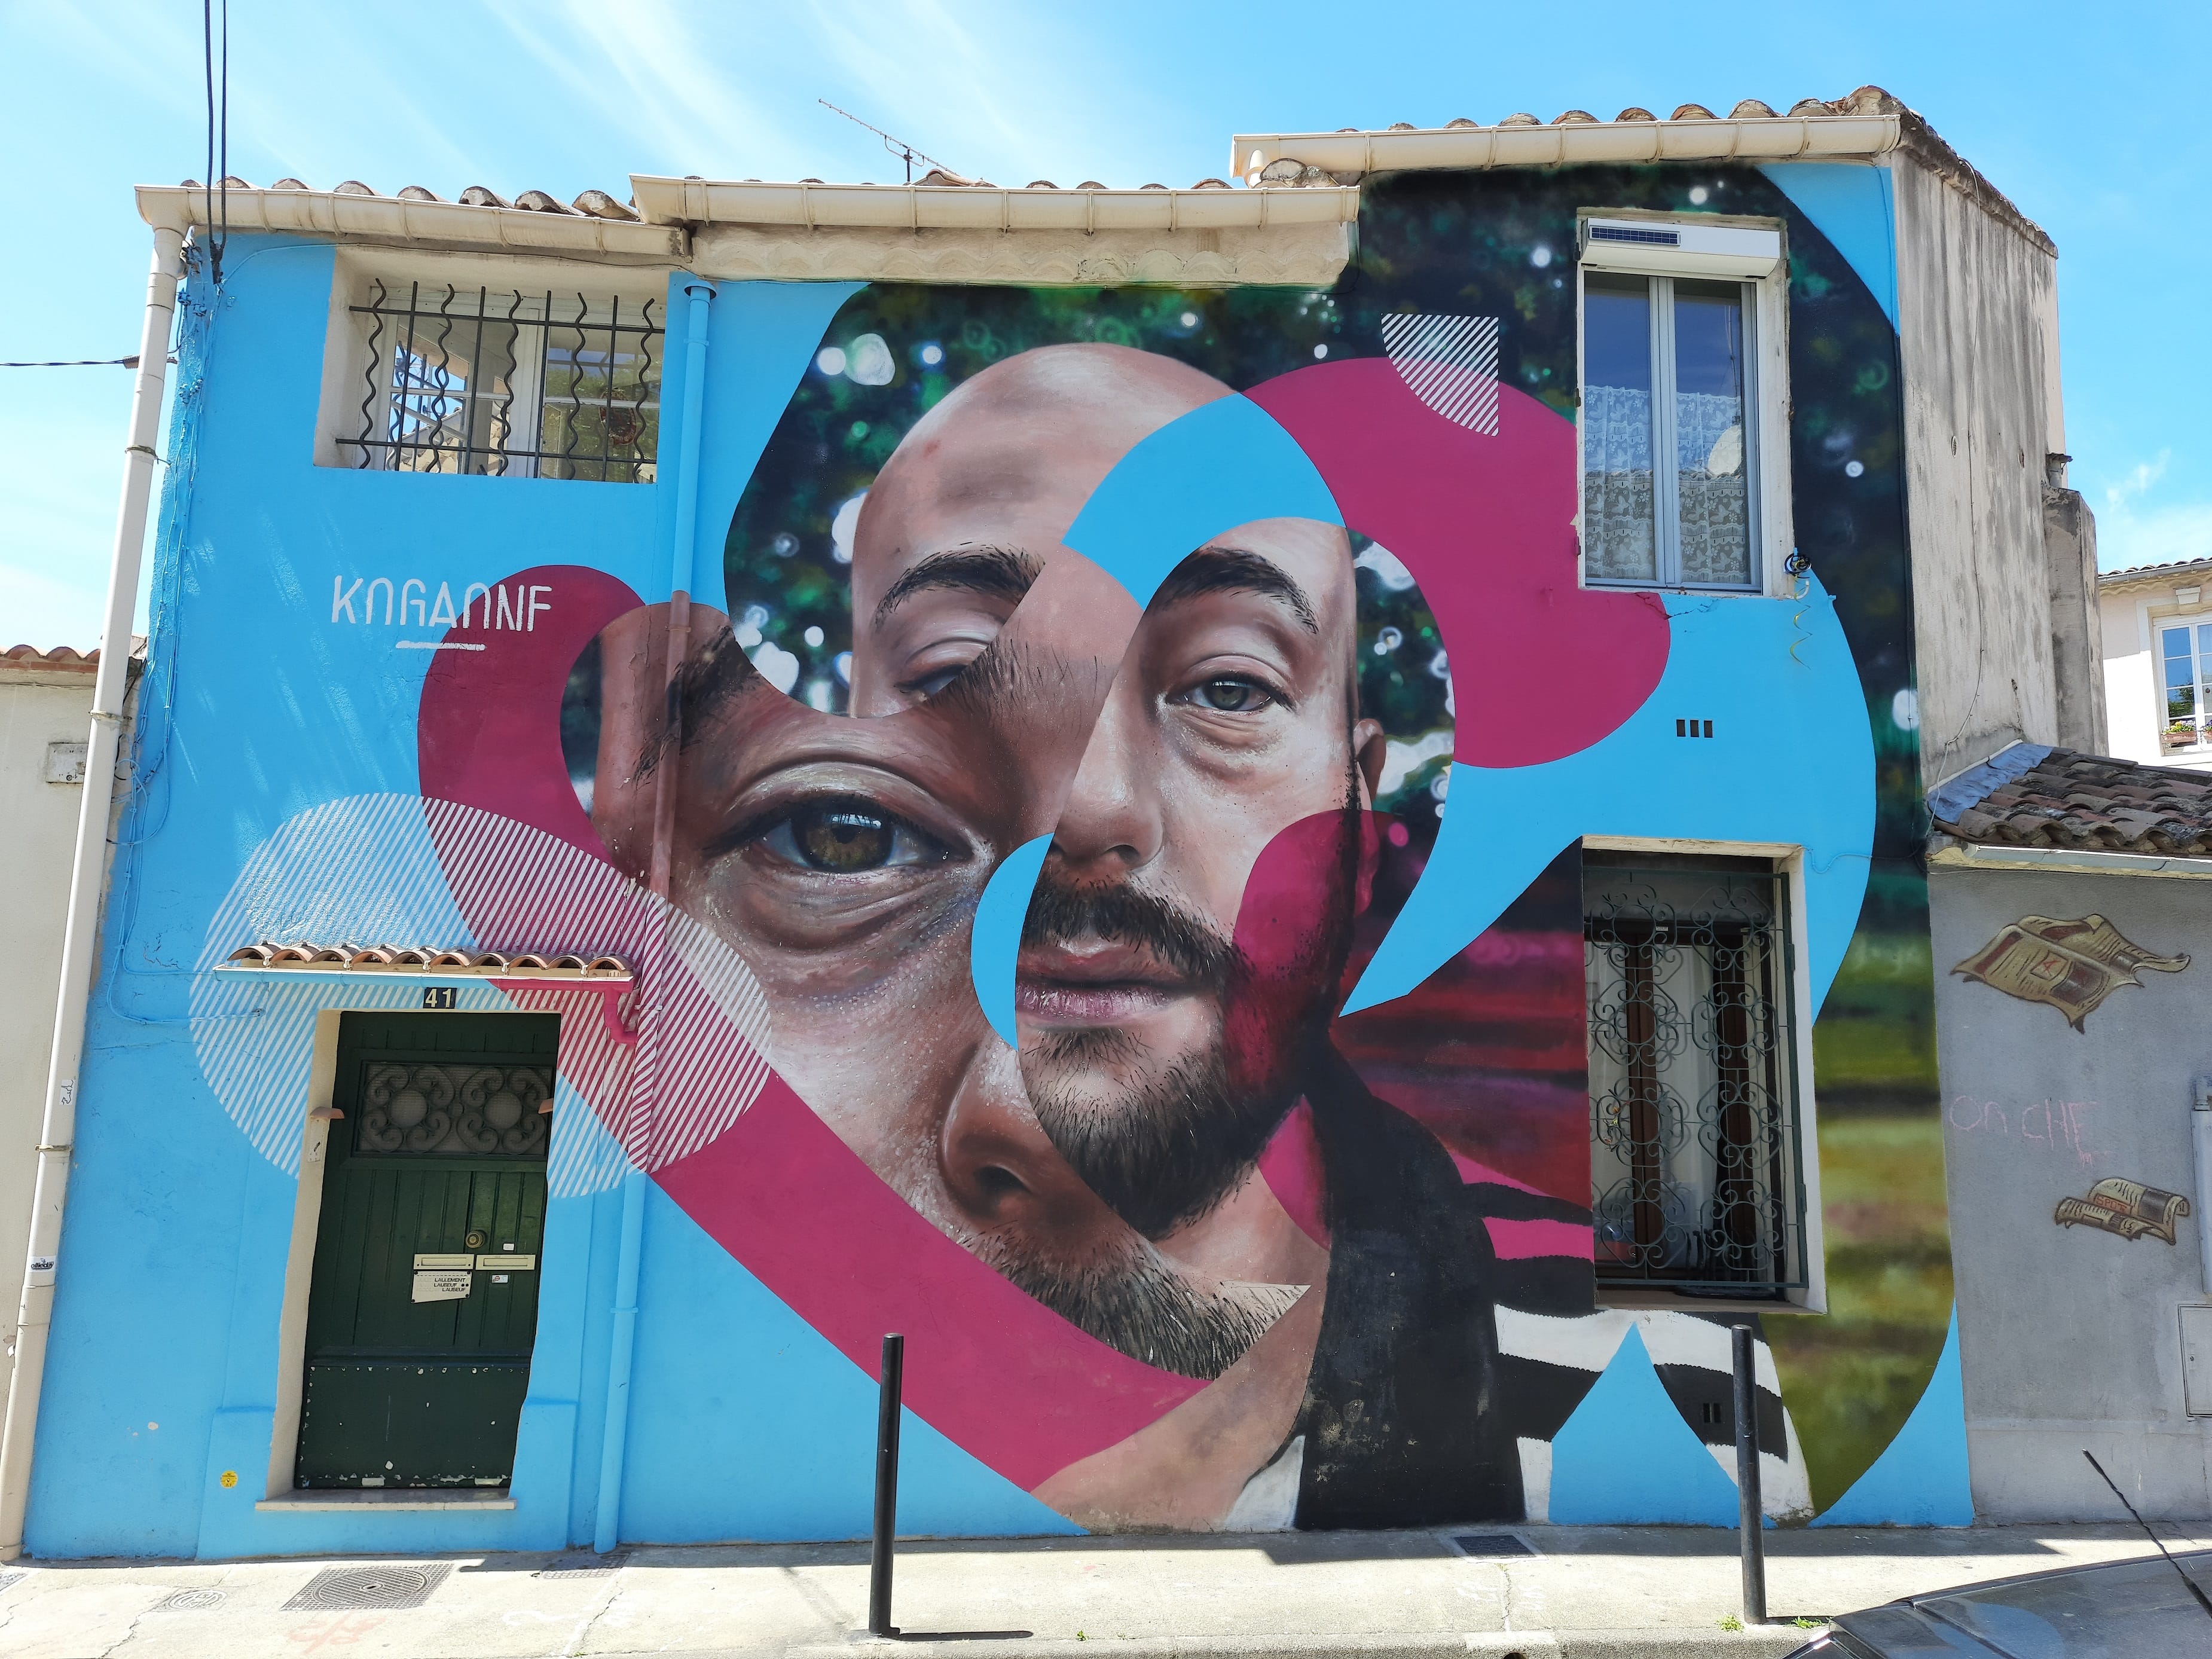 Graffiti 6484  by the artist KogaOne captured by Mephisroth in Nîmes France